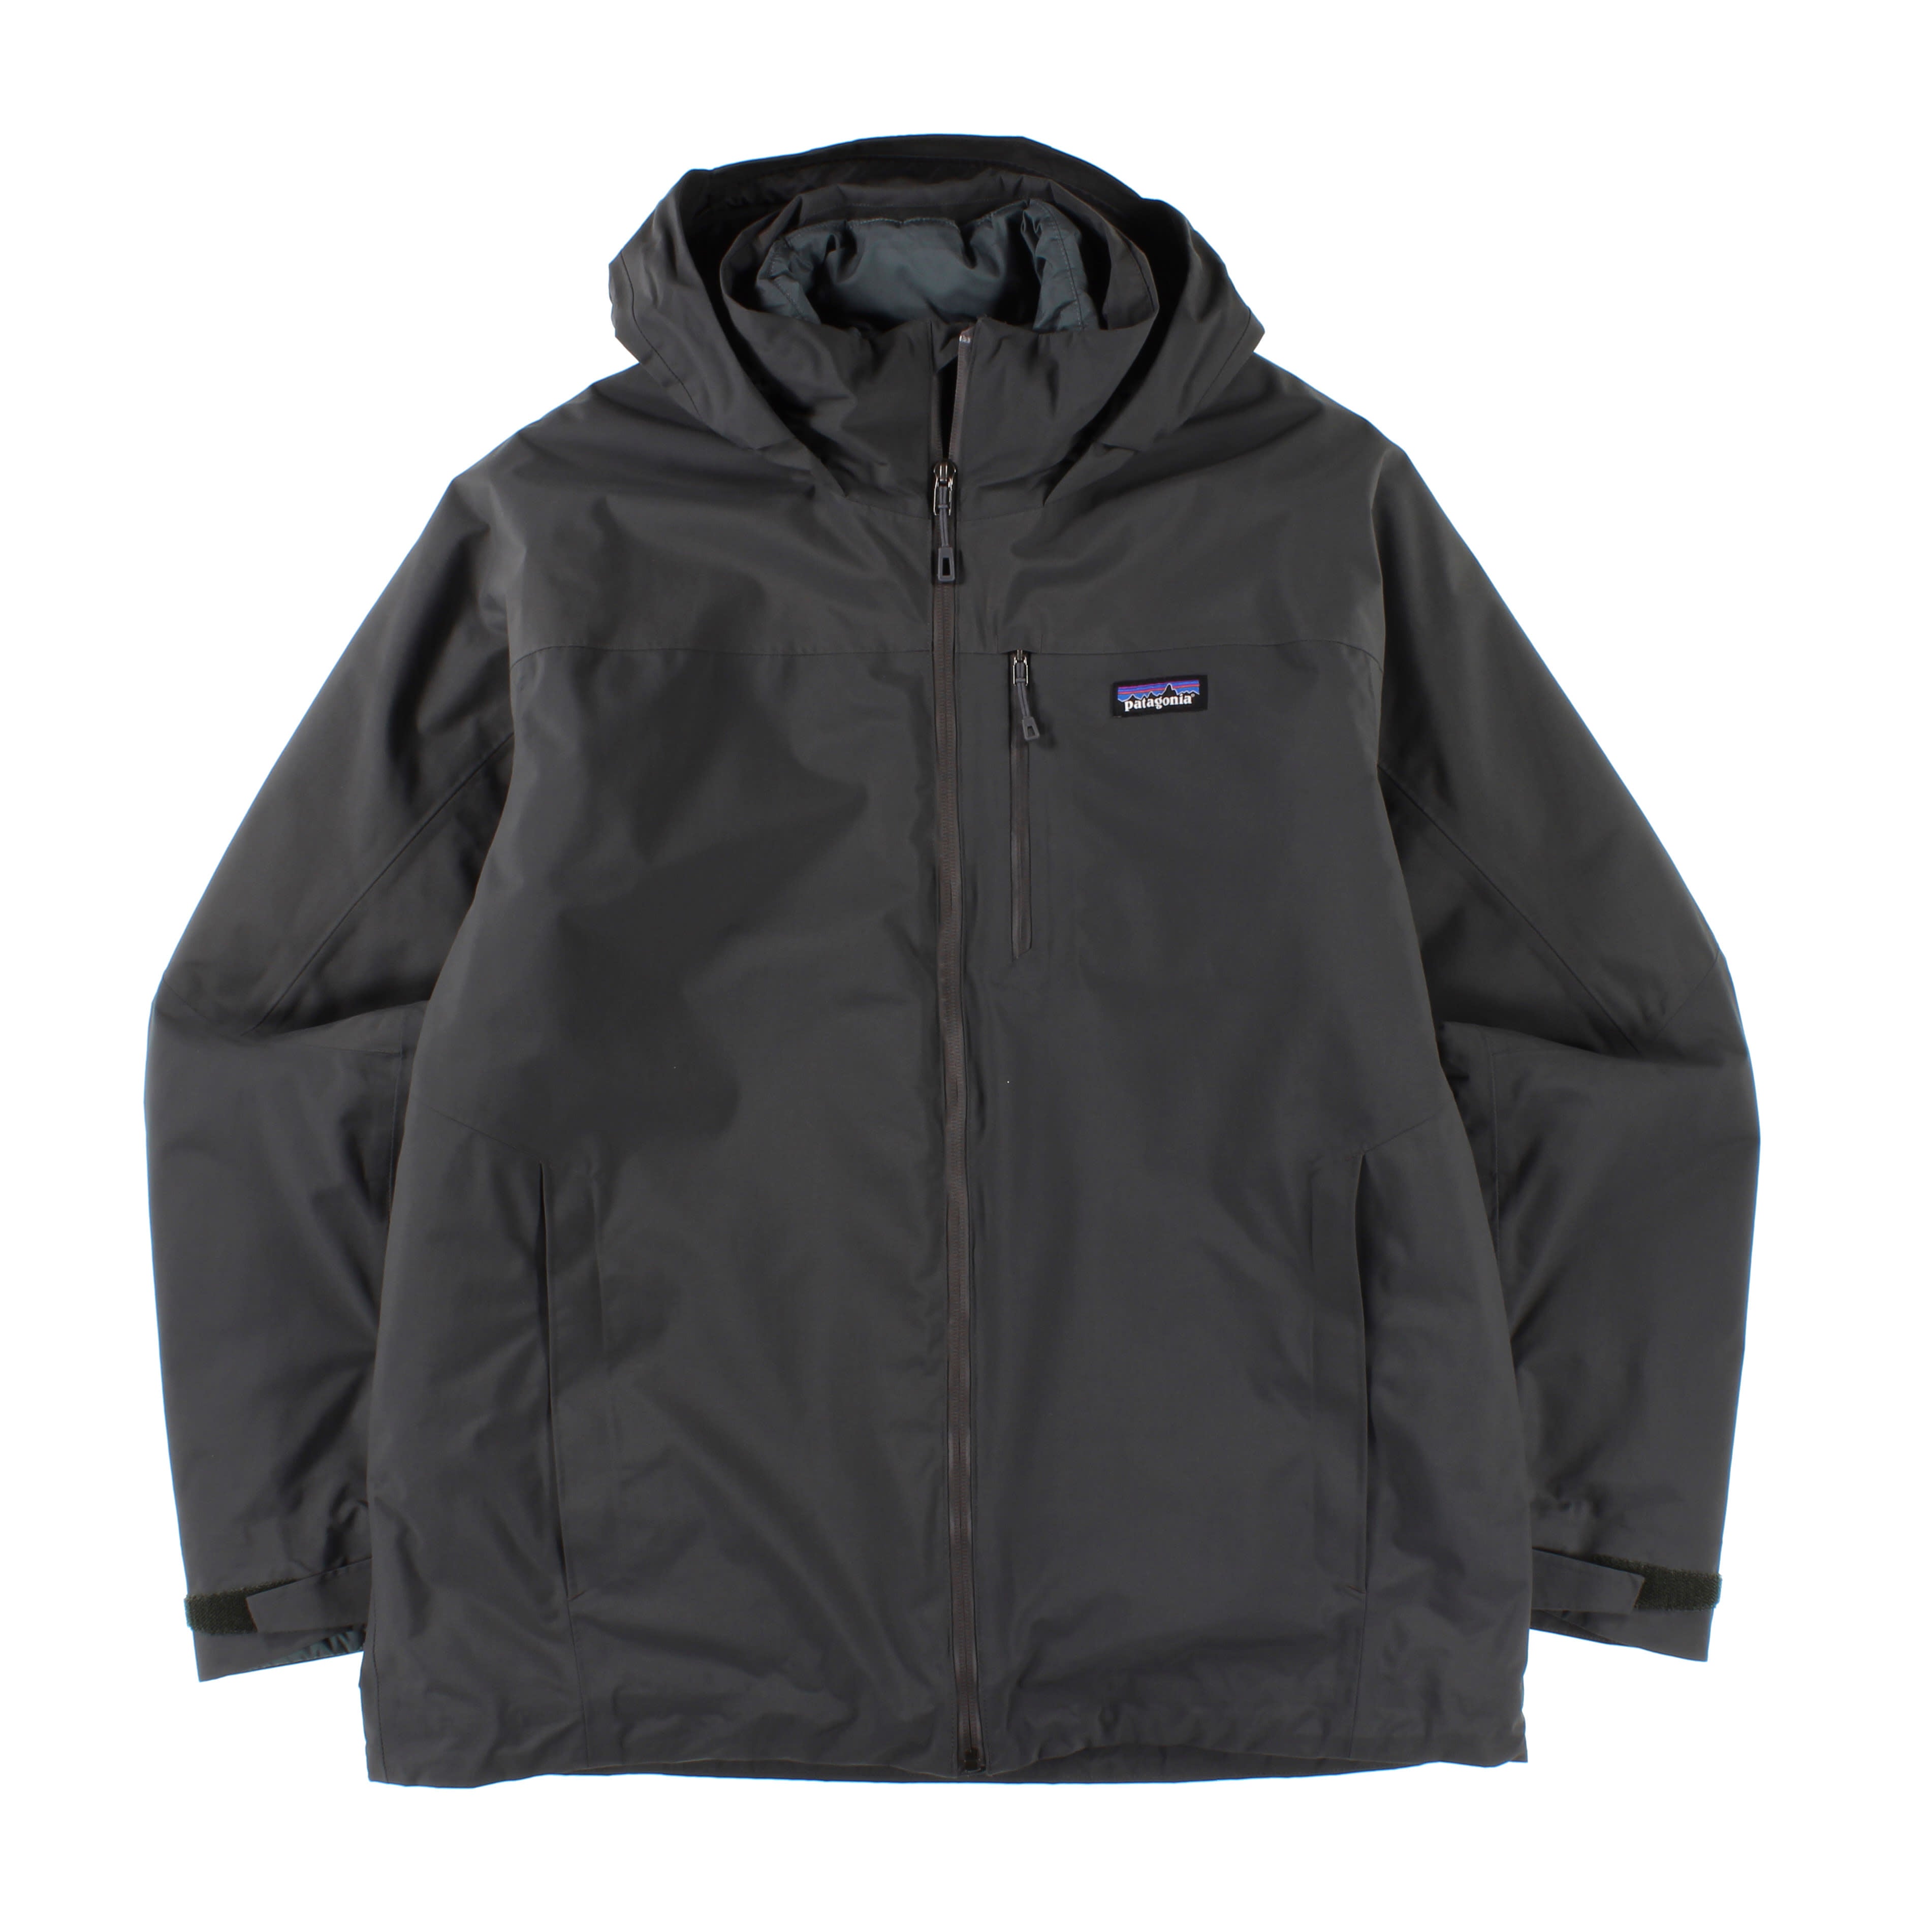 M's Windsweep 3-in-1 Jacket